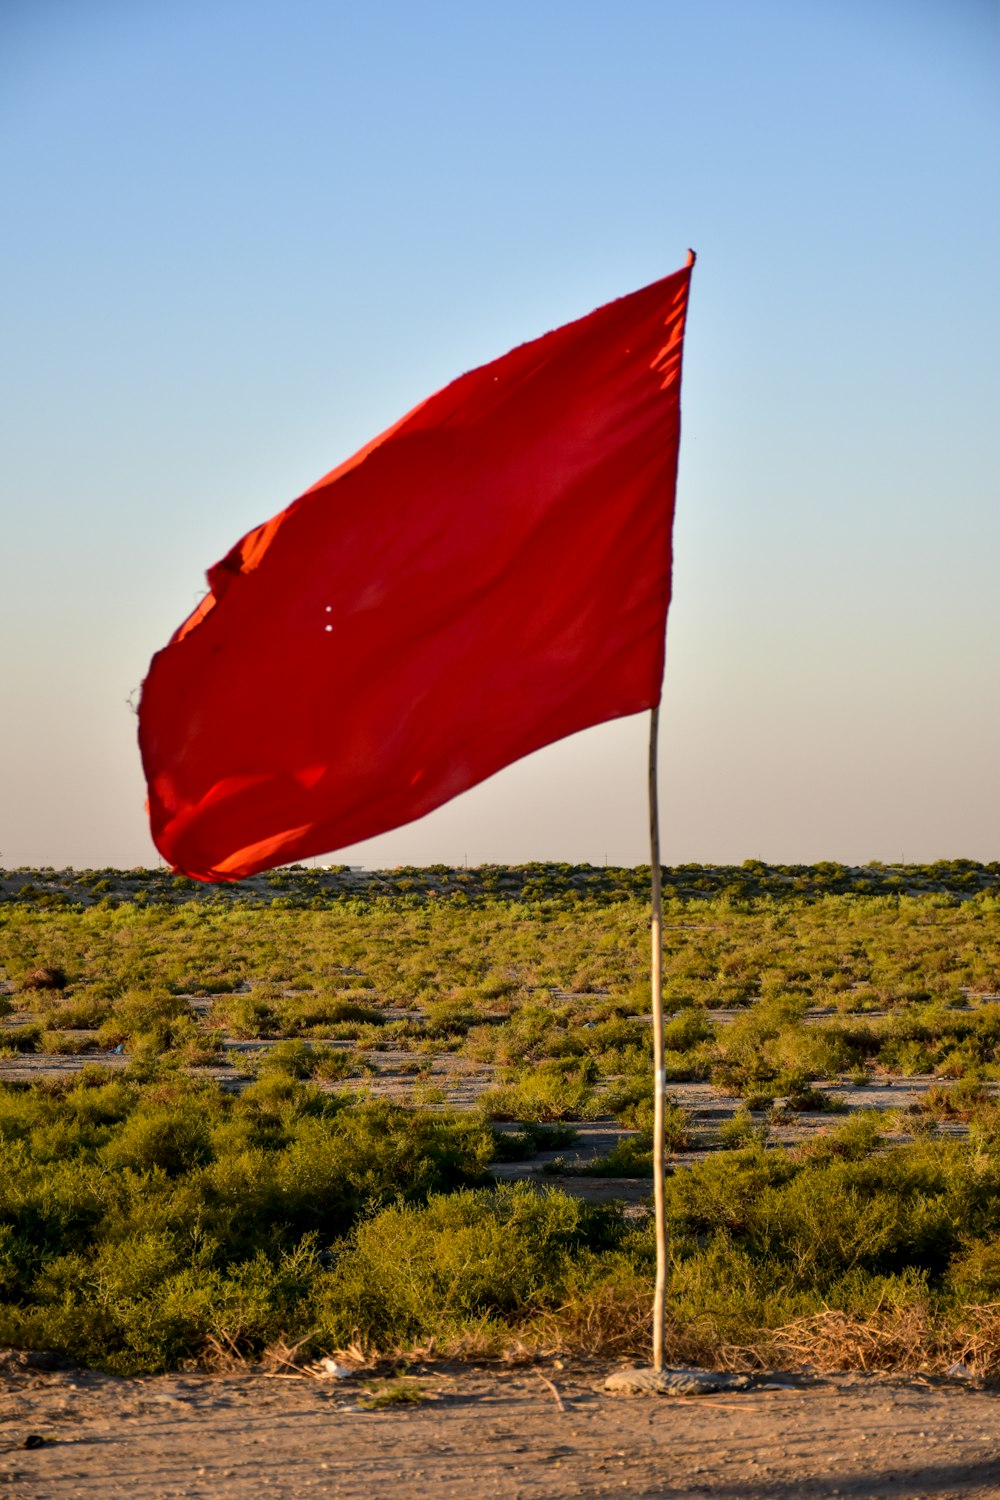 red flag on white pole